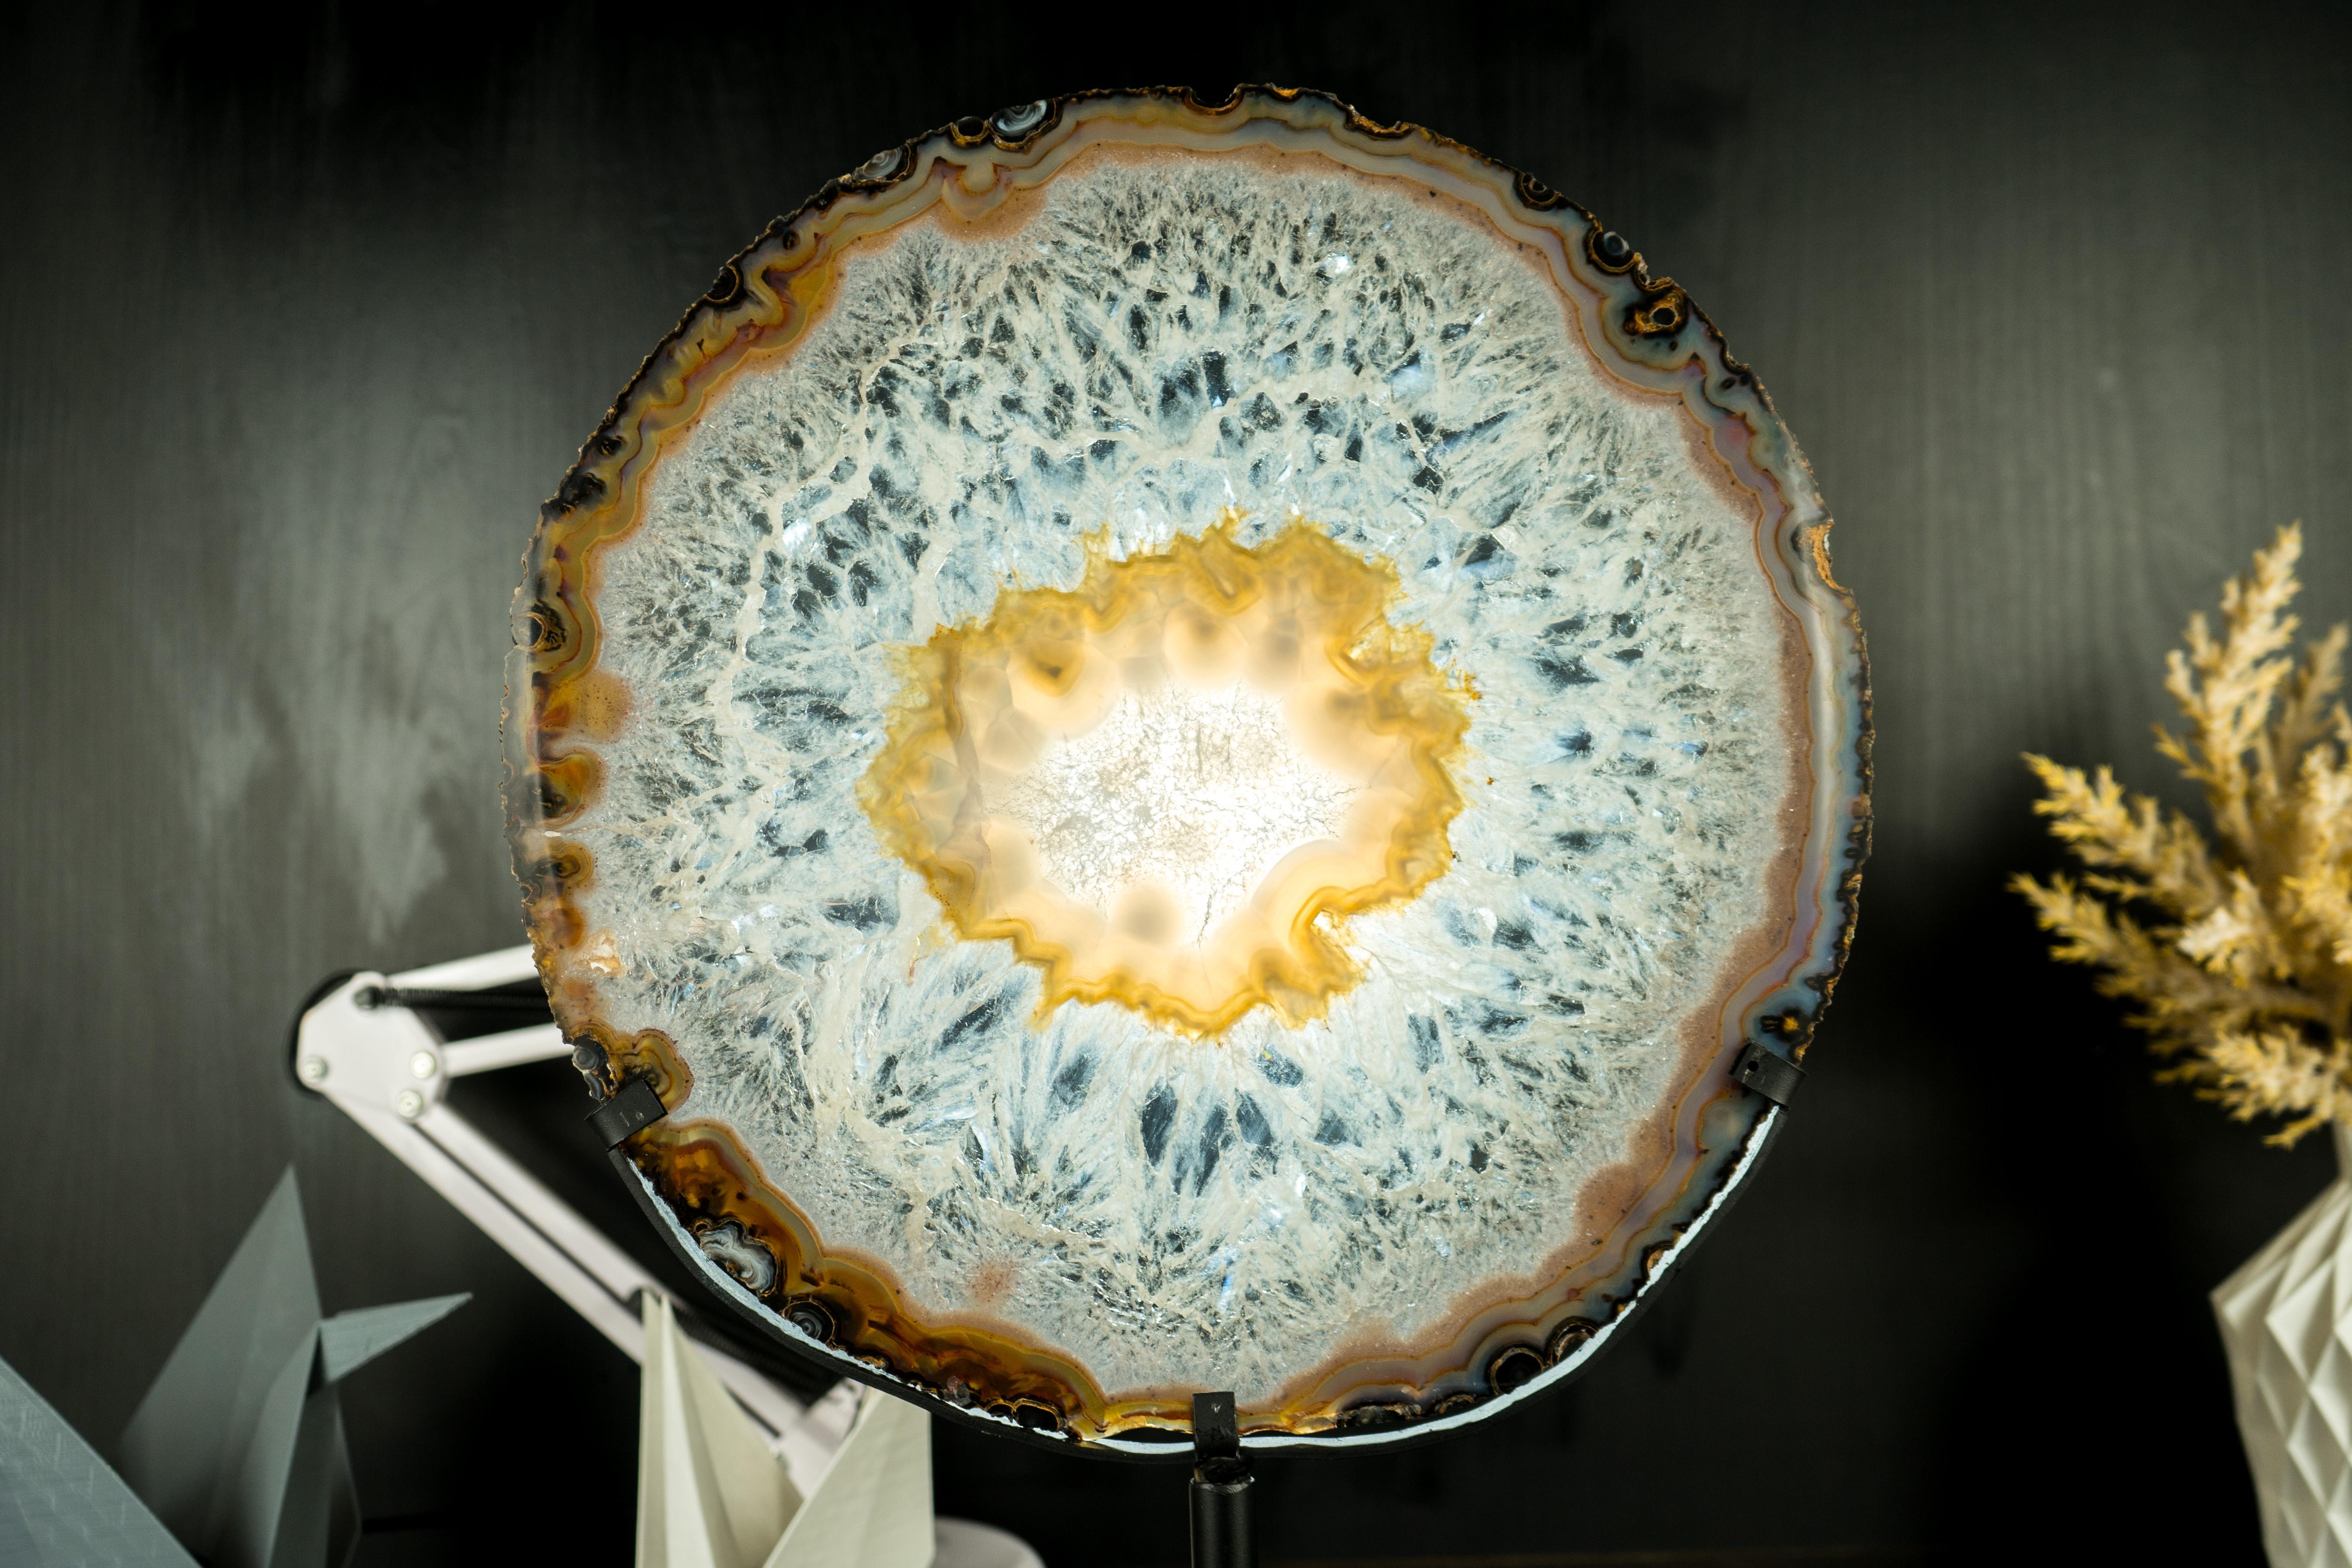 Gallery Grade Large Lace Agate Slice, with Ice-Like Crystal and Colorful Agate 6